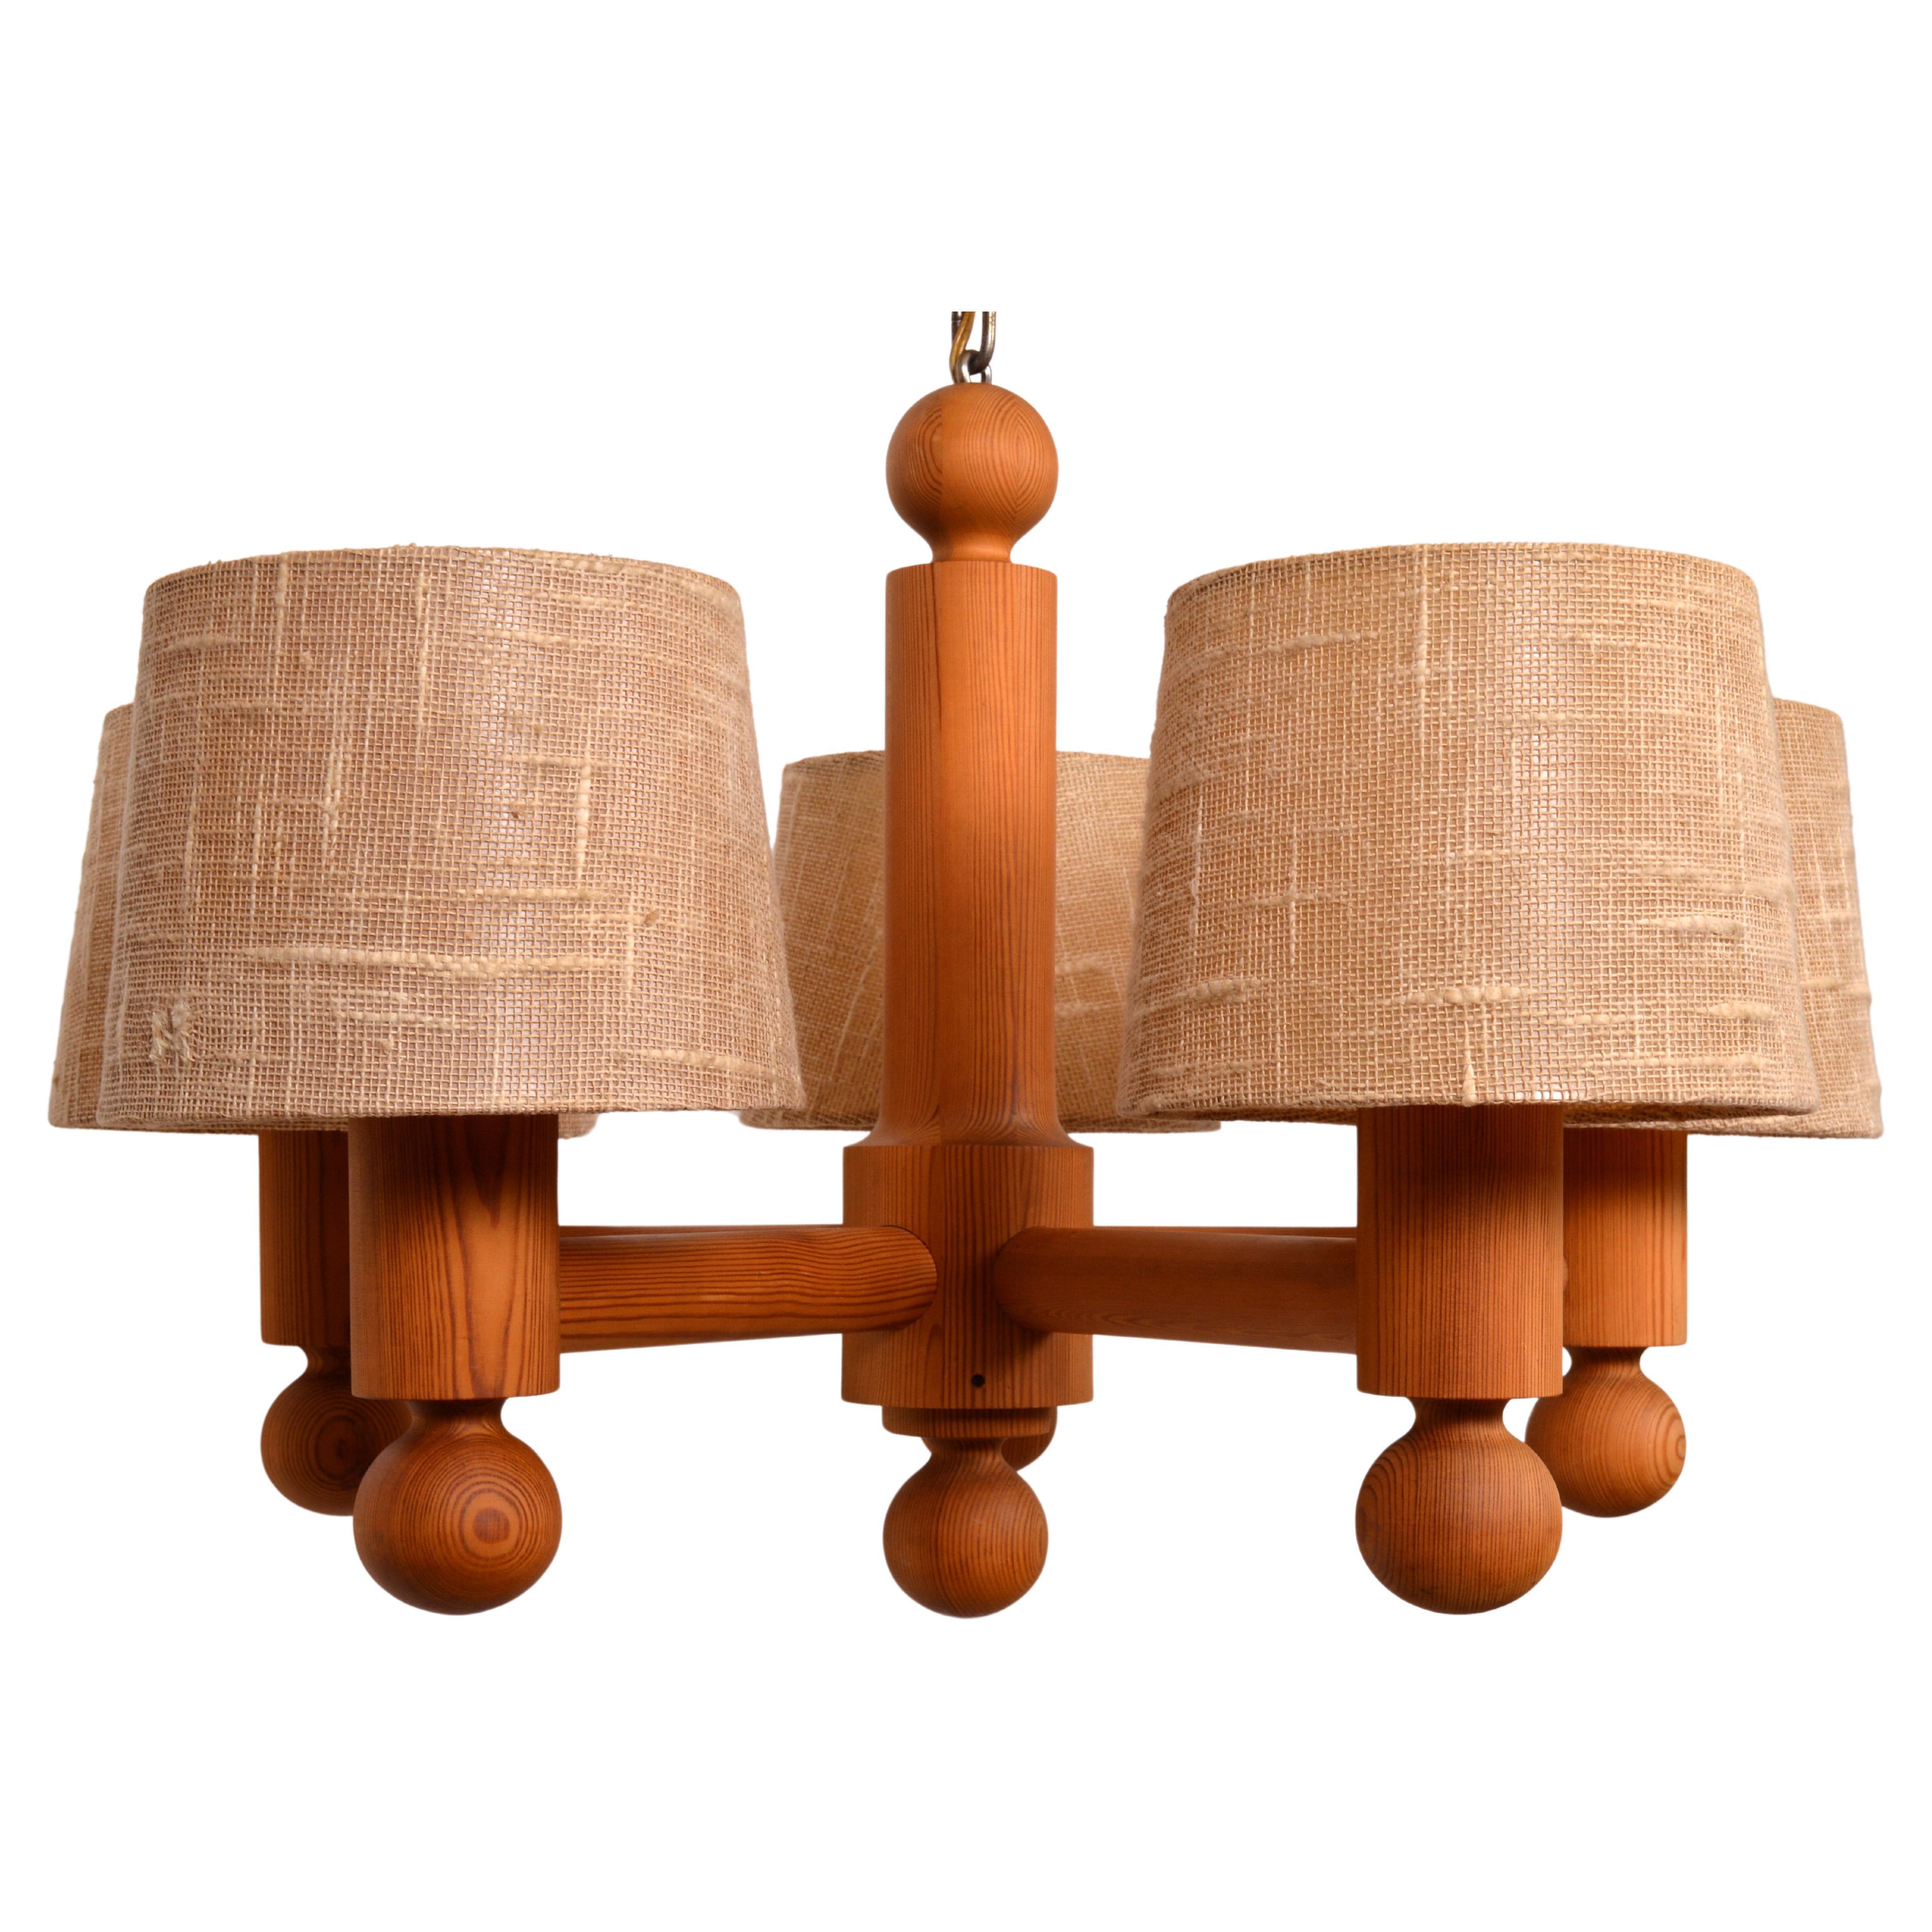 Large Five Arm Solid Pine Chandelier with Fabric Shades by Luxus Sweden, 1960s For Sale